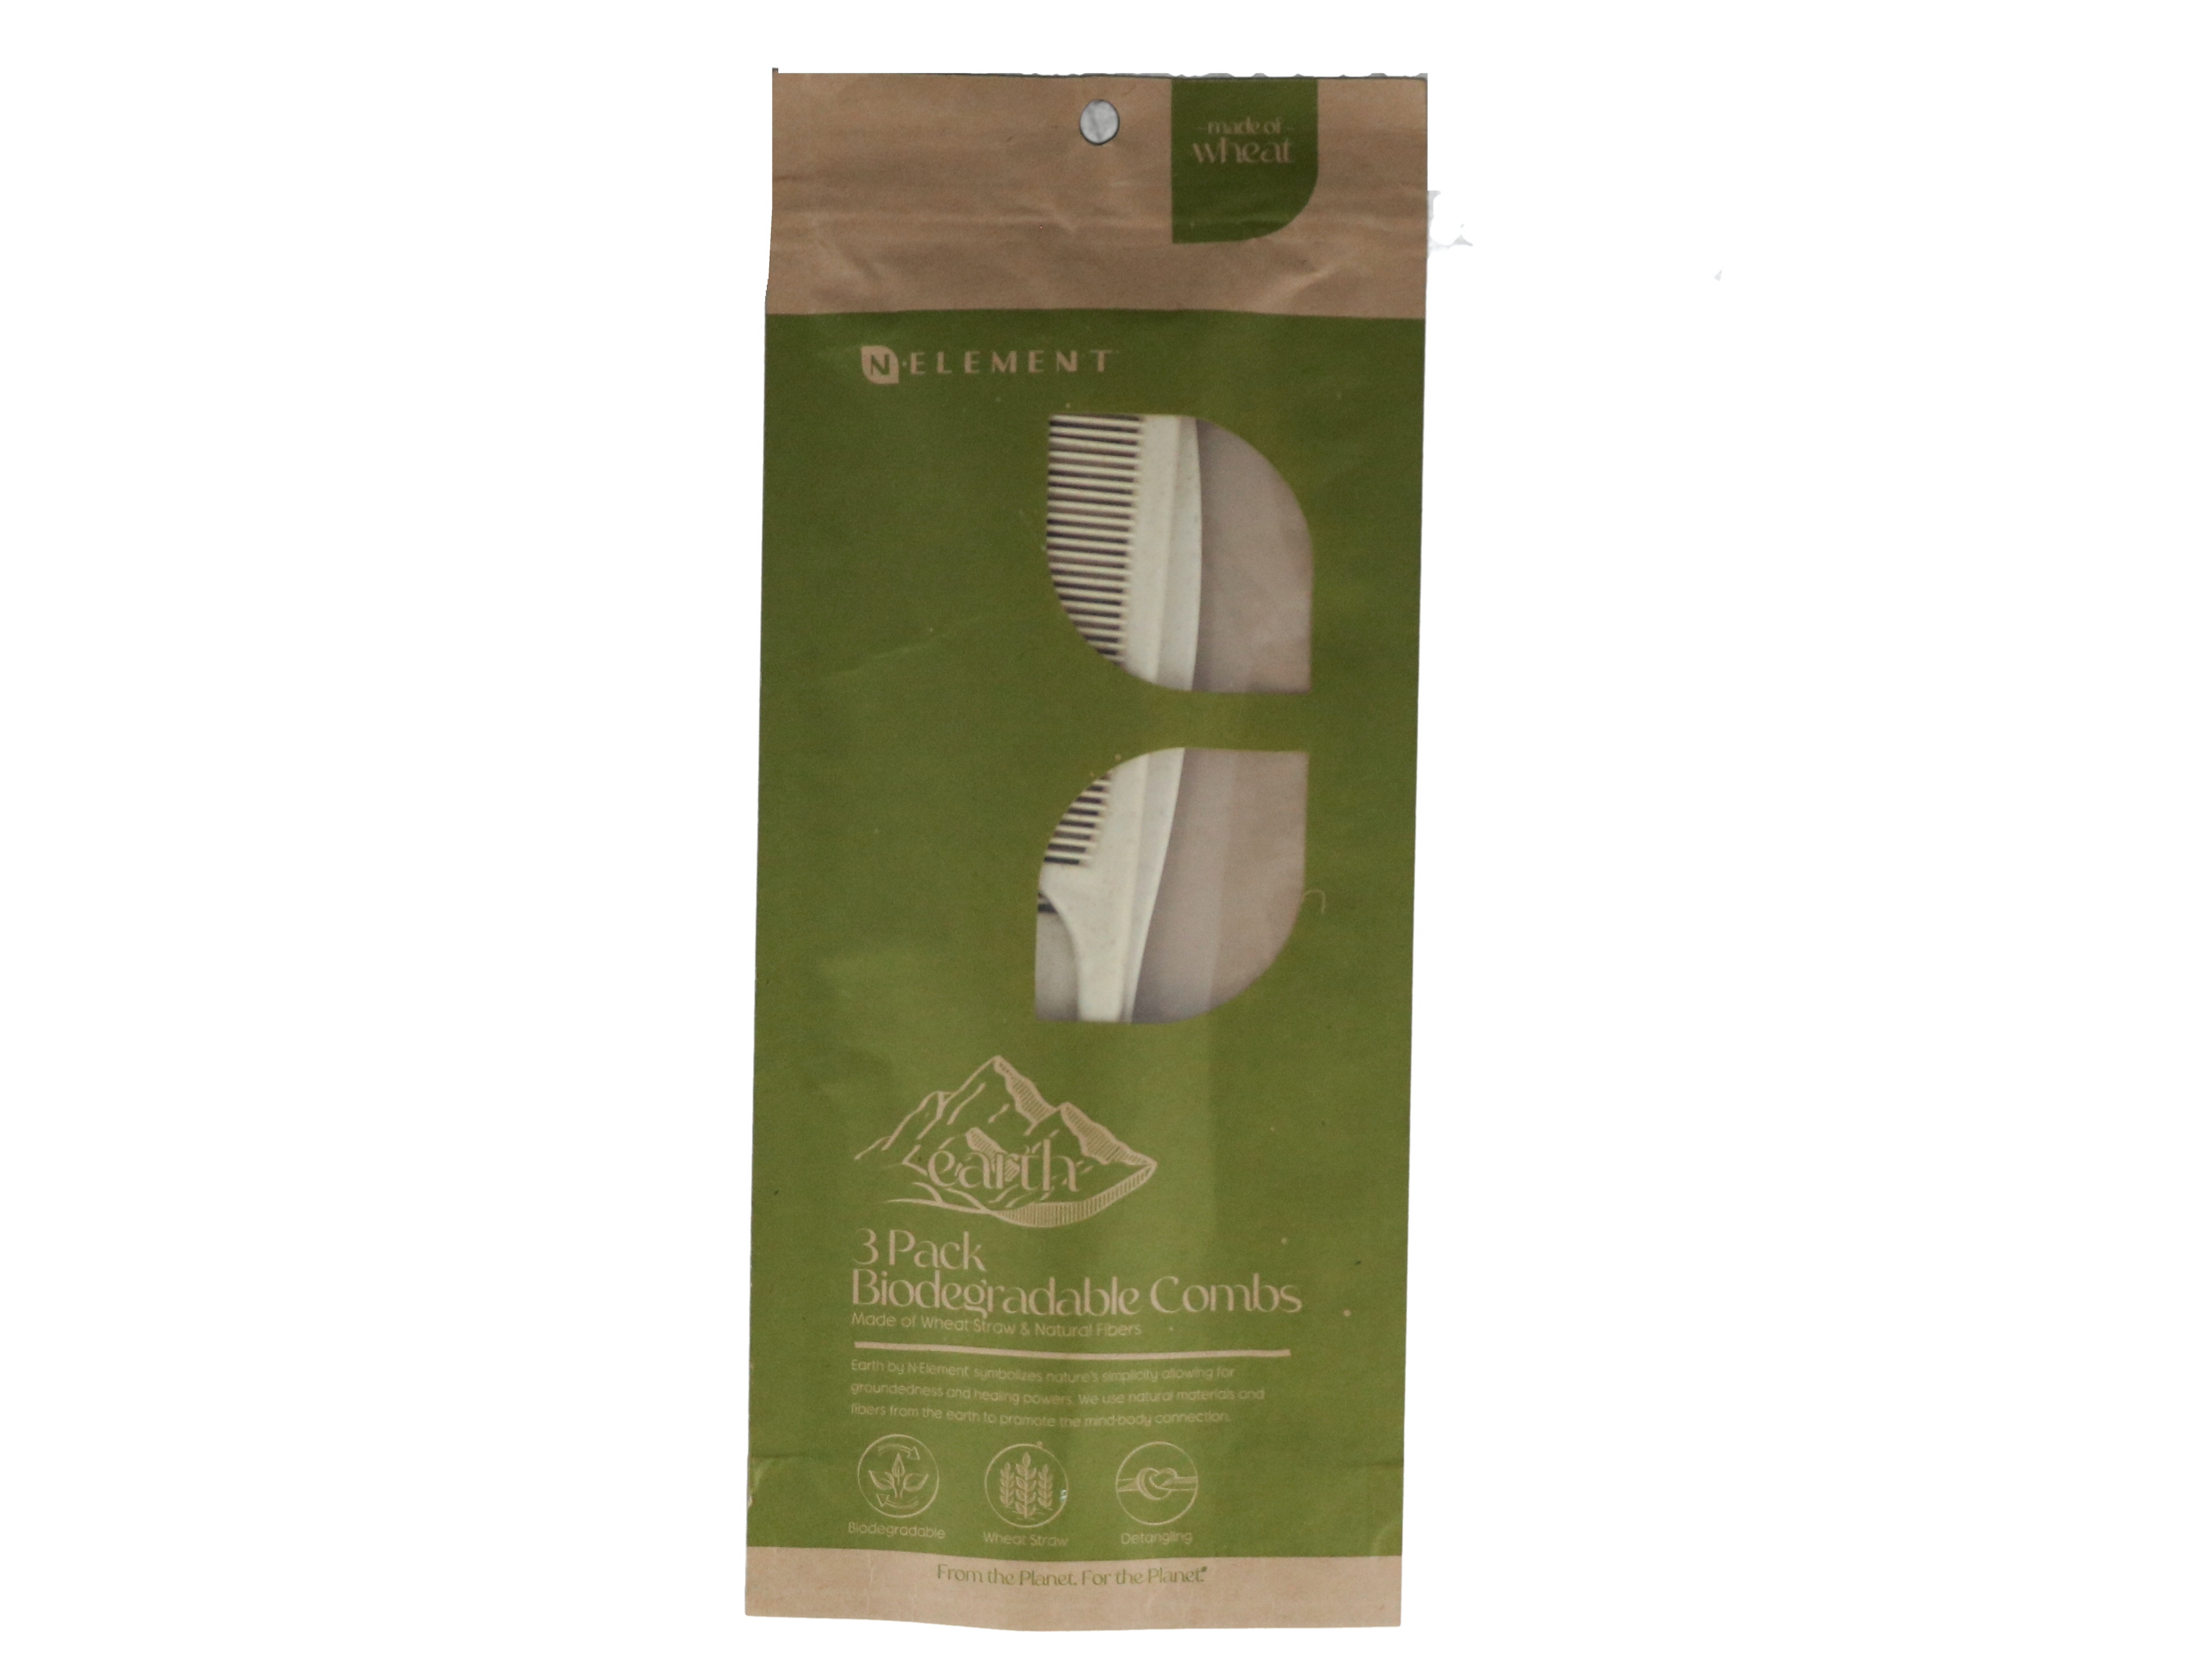 3 PACK BIODEGRADABLE COMBS